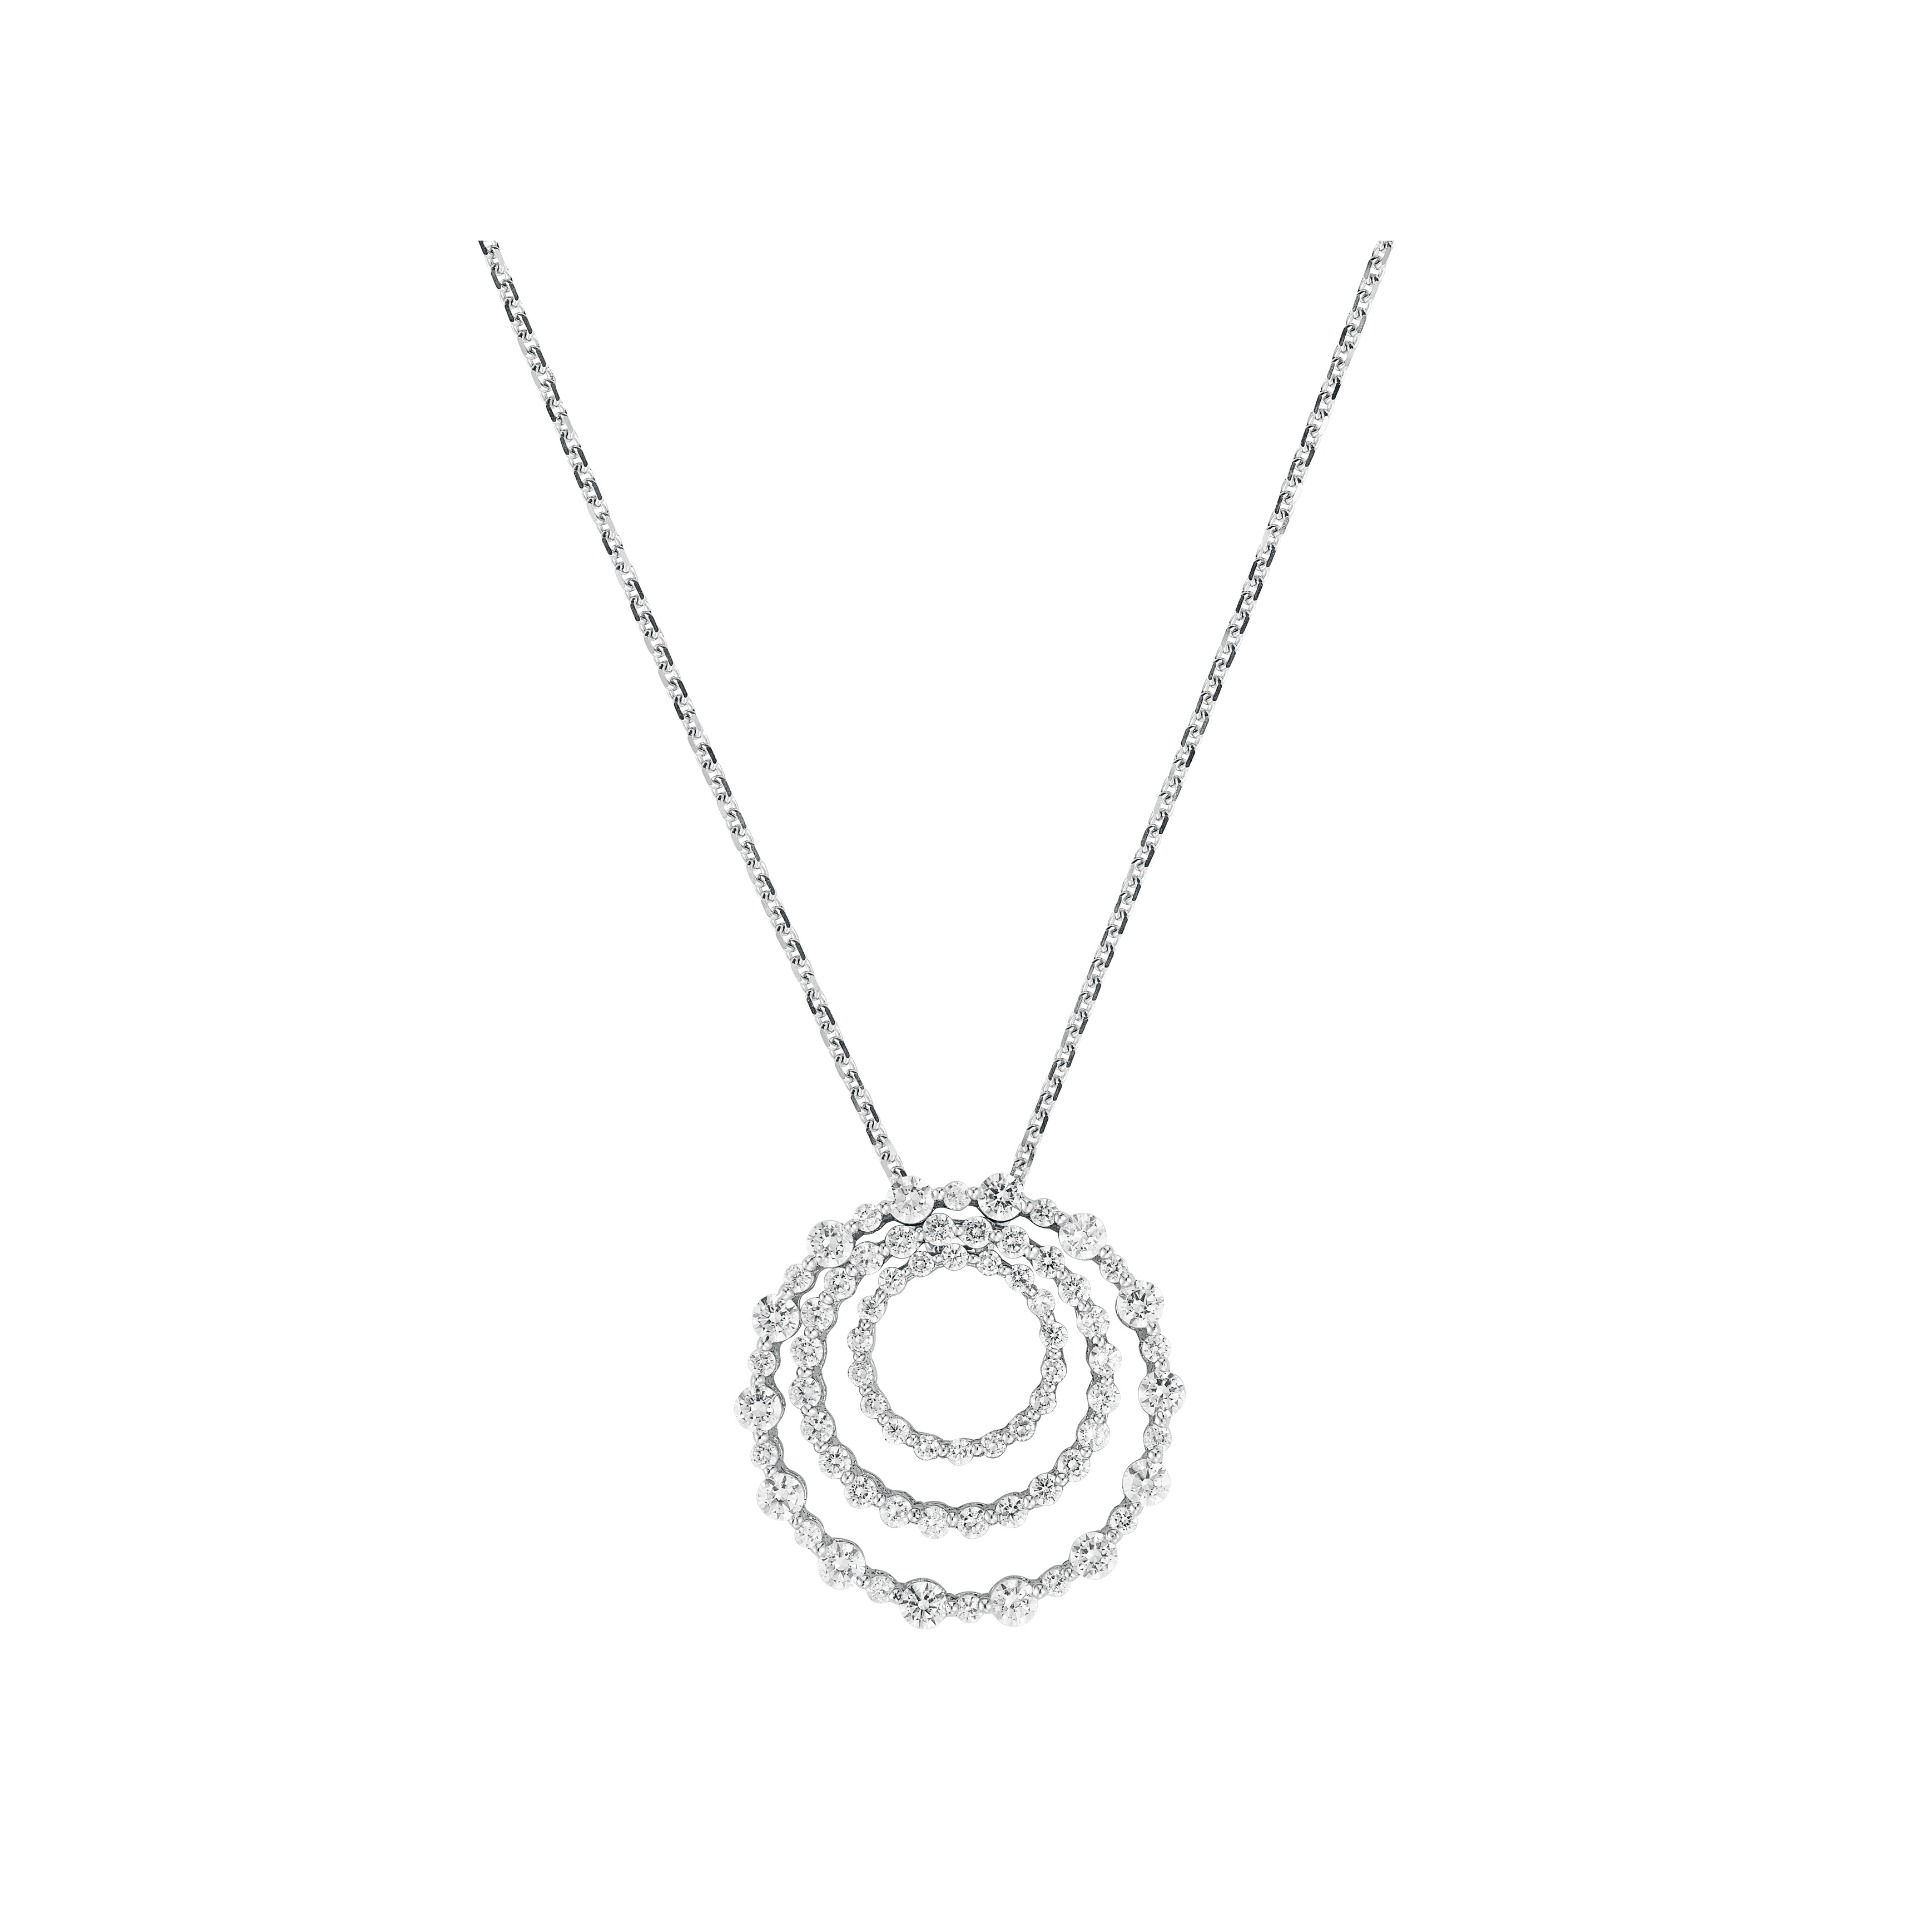 Keepers Collection - 1.3ct Eternal Diamond Necklace - Alicia J Diamonds